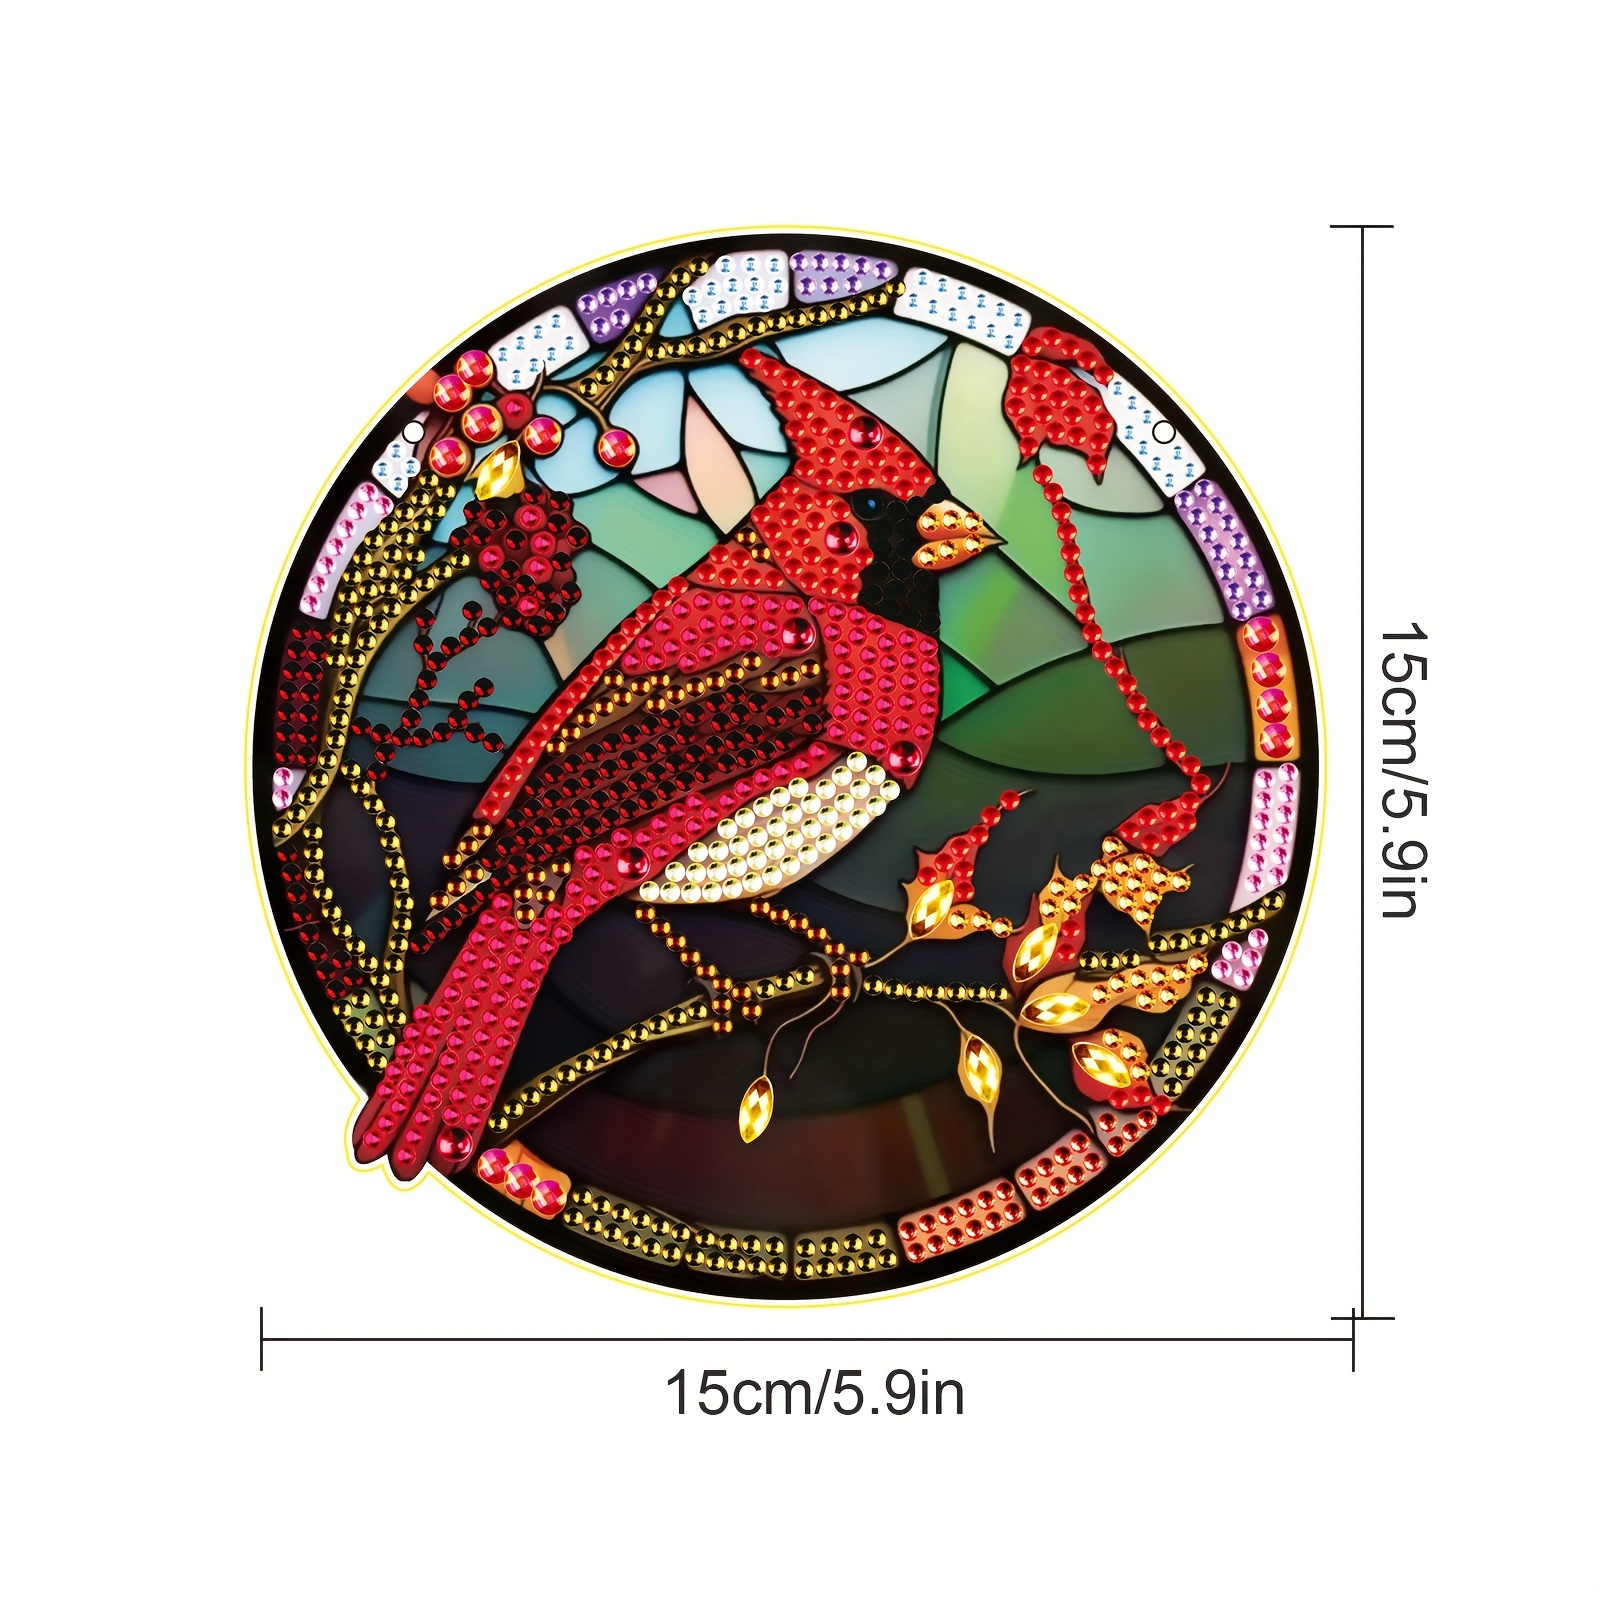 Diamond Painting Hanging, Kingfisher 3D Three-dimensional Diamond Painting  Kit, Diamond Art Hanging Decorations, Suitable For Home Wall Garden Decorat